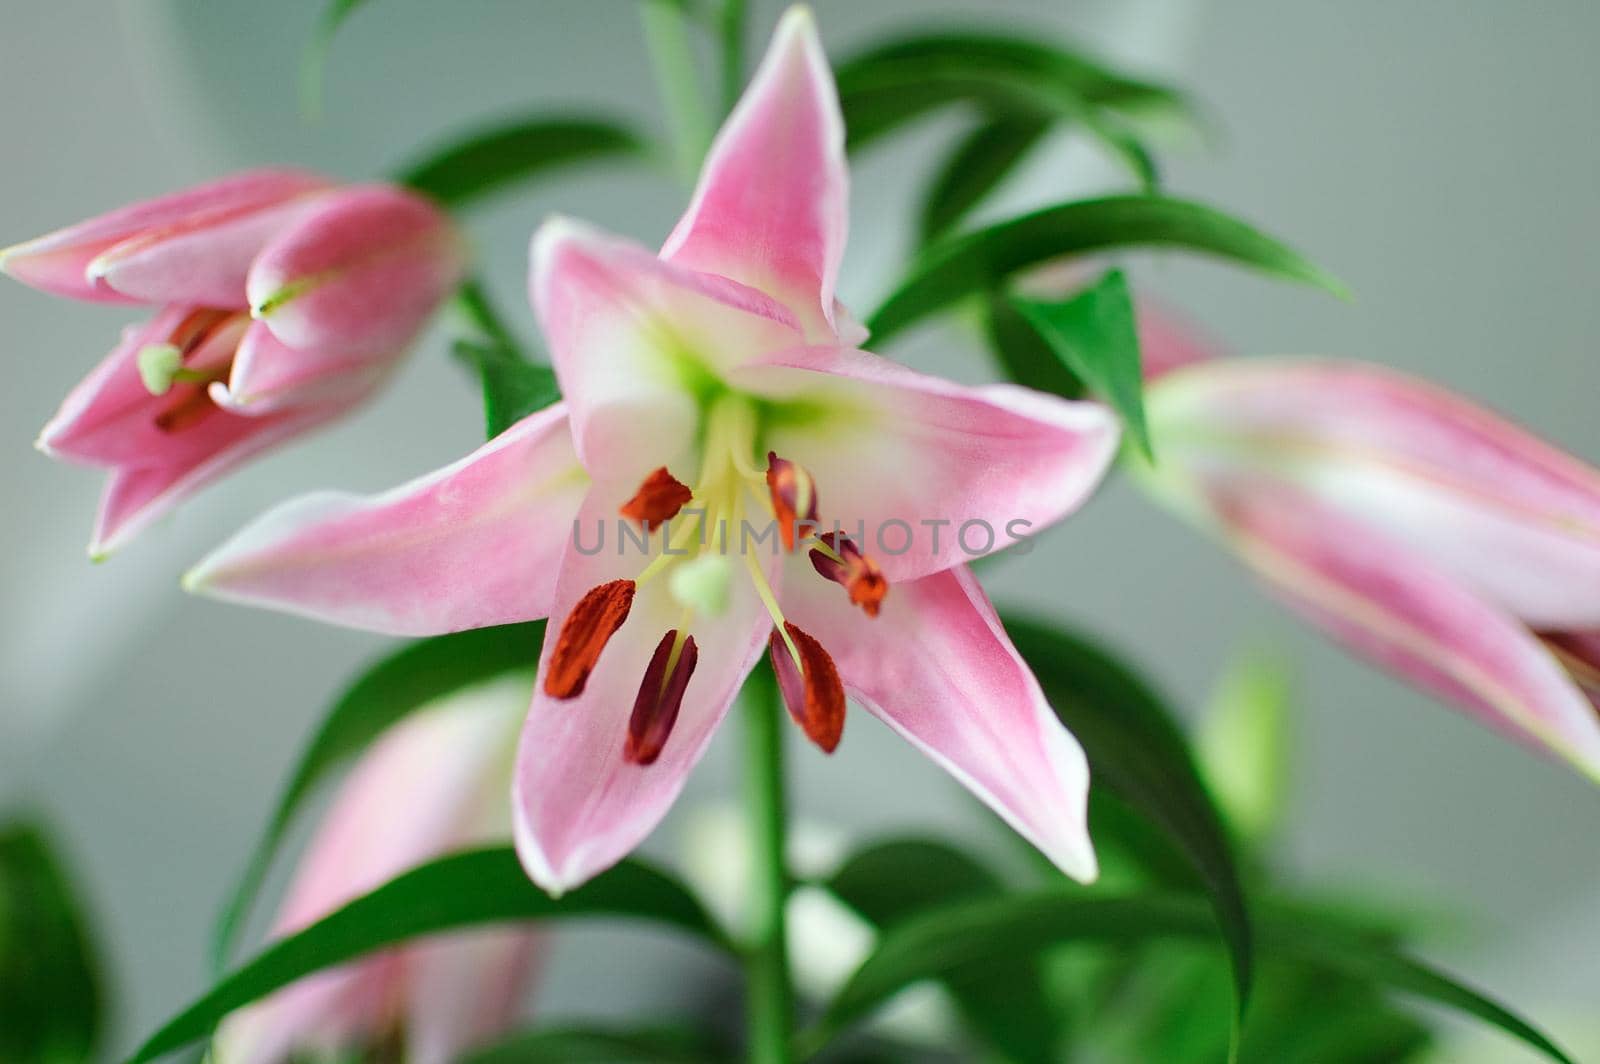 Photo of a perfect bouquet of beautiful lilies on table, pink lily flowers by balinska_lv